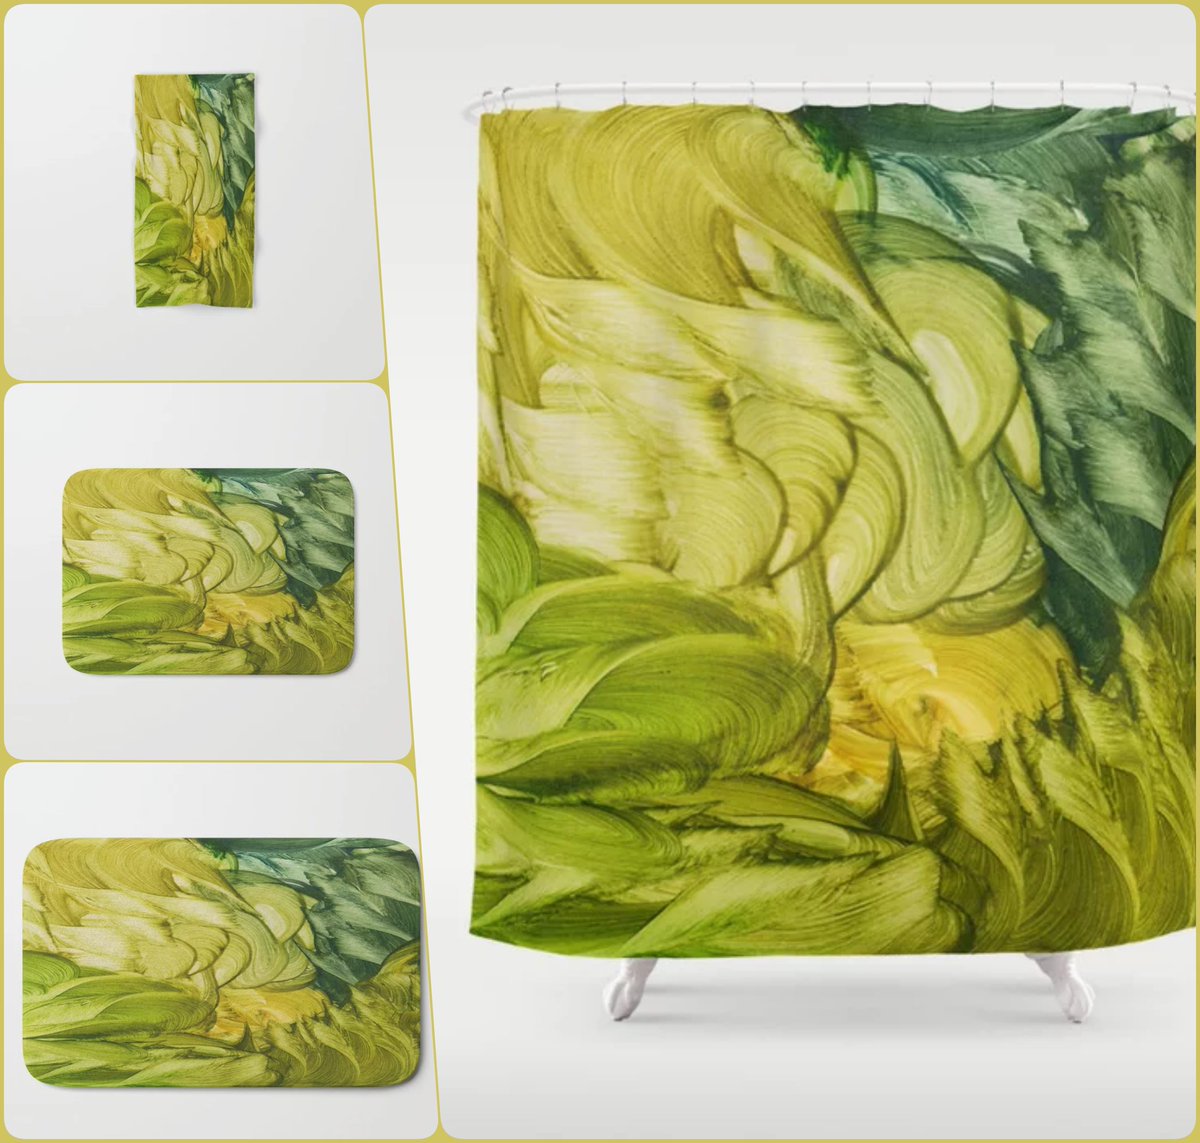 Maria Shower Curtain~by Art Falaxy~ ~Art that Elevates your Shower!~ #artfalaxy #shower #bath #towels #rugs #art #society6 #homedecor #Society6max #swirls #modern #trendy #accessories #accents #mats #gifts society6.com/product/mariam… COLLECTION: society6.com/art/mariamman?…